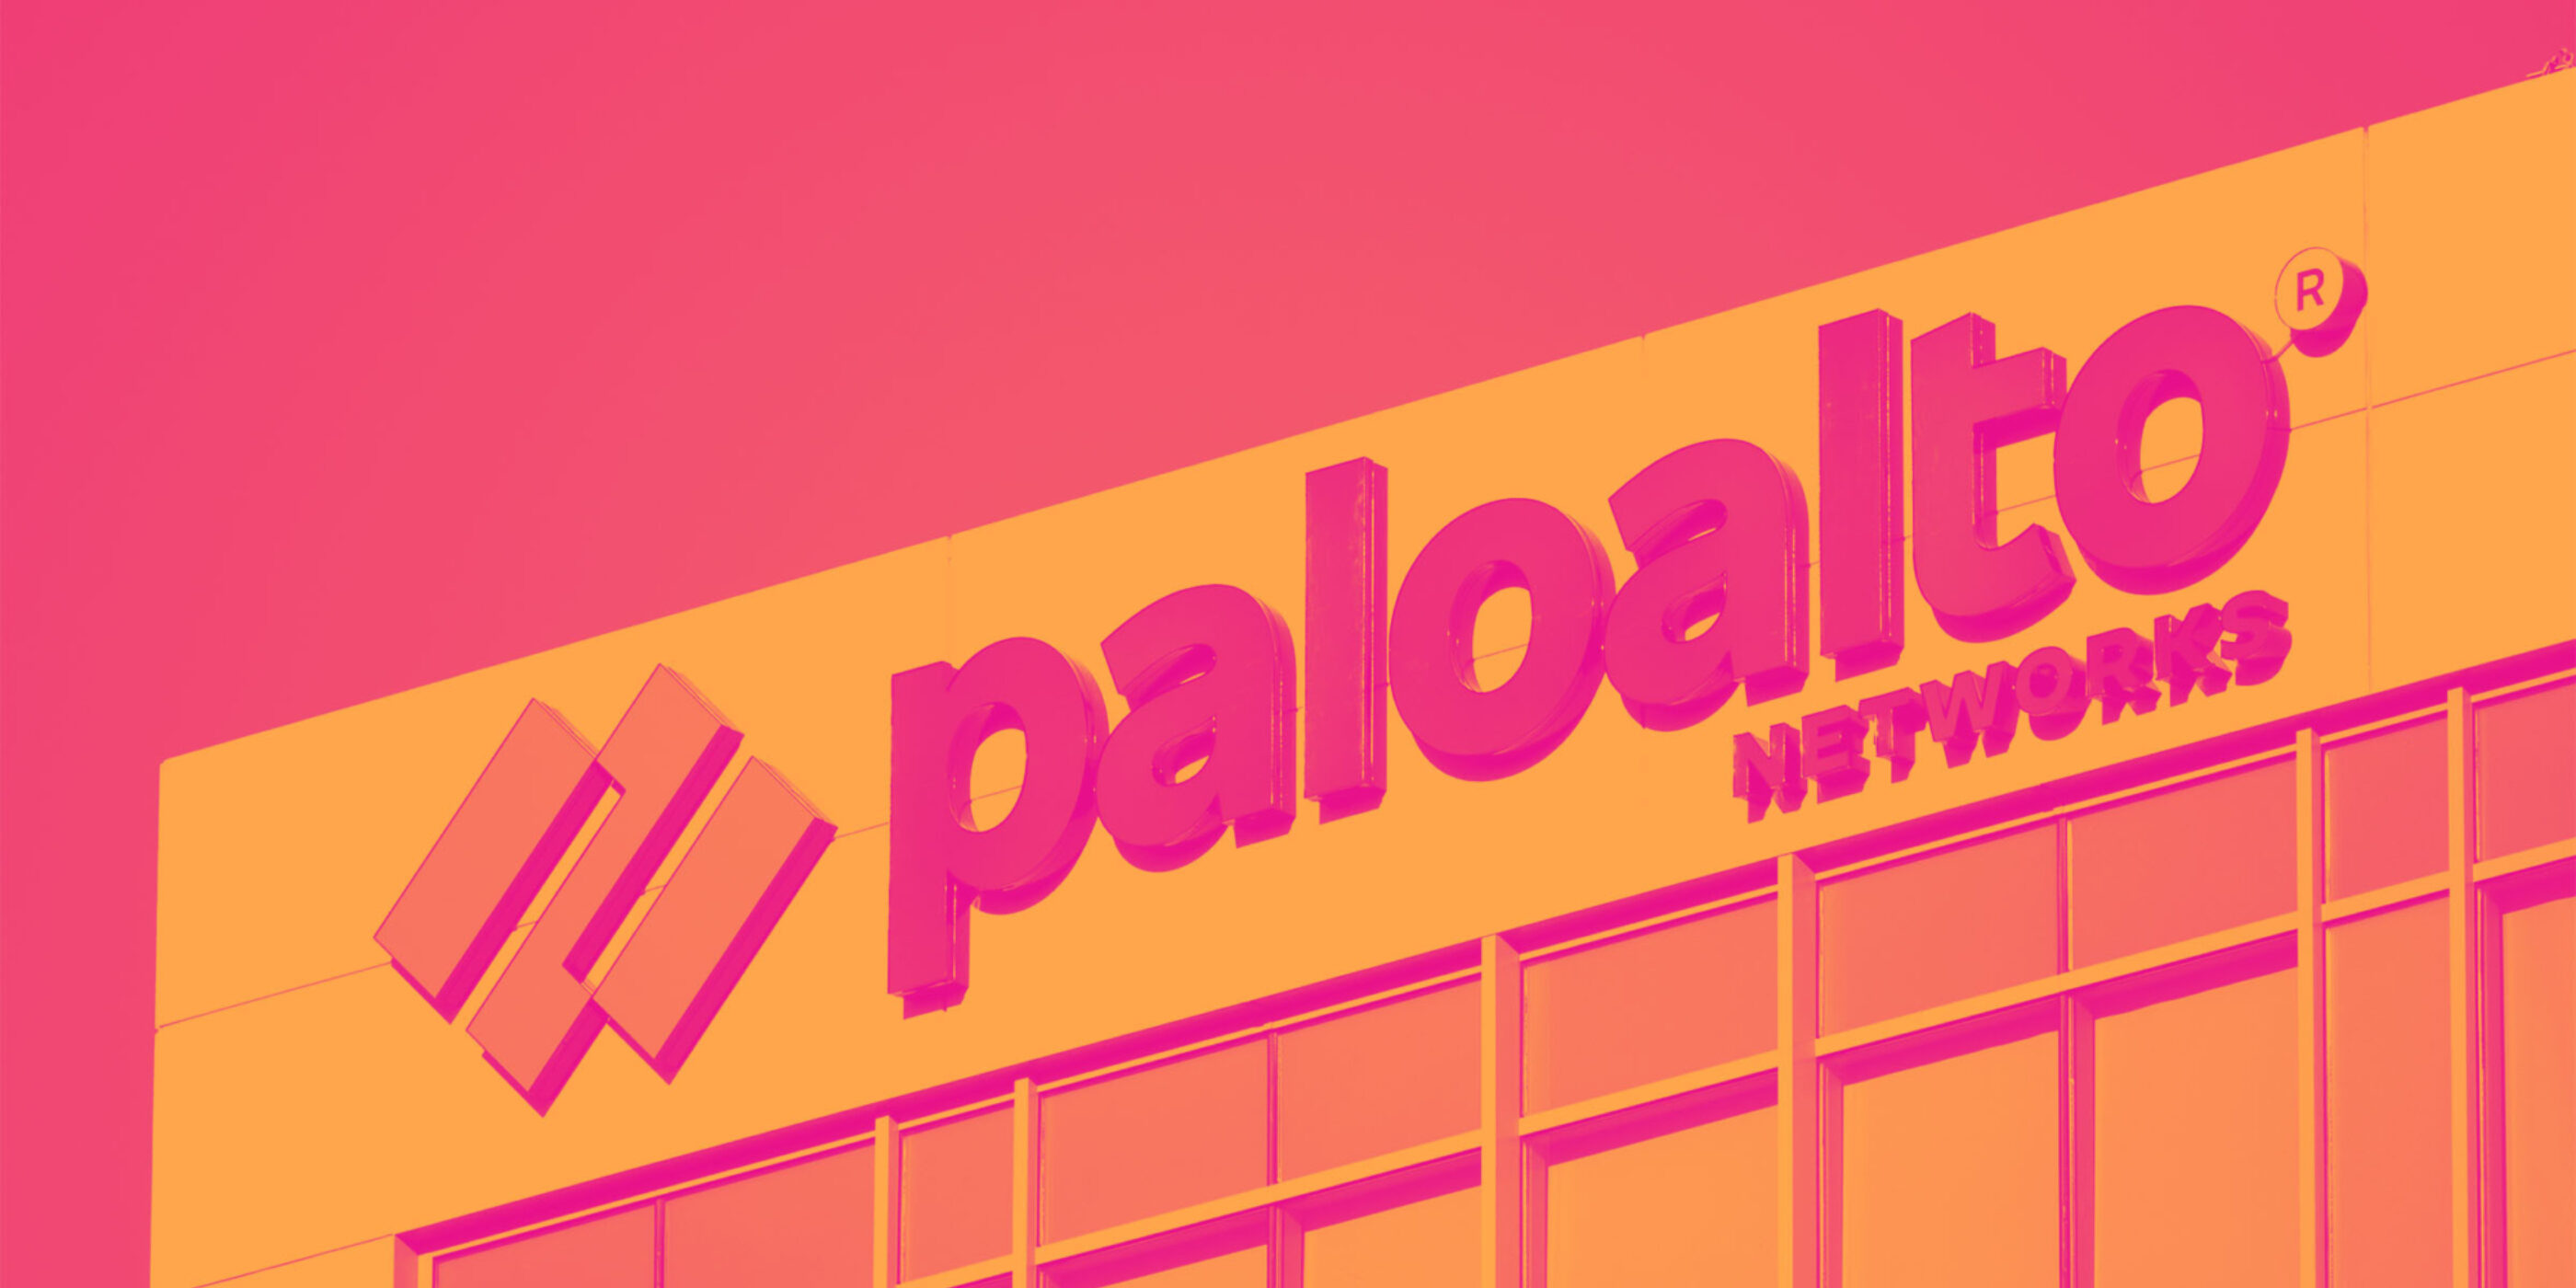 Why Palo Alto Networks (PANW) Stock Is Trading Lower Today